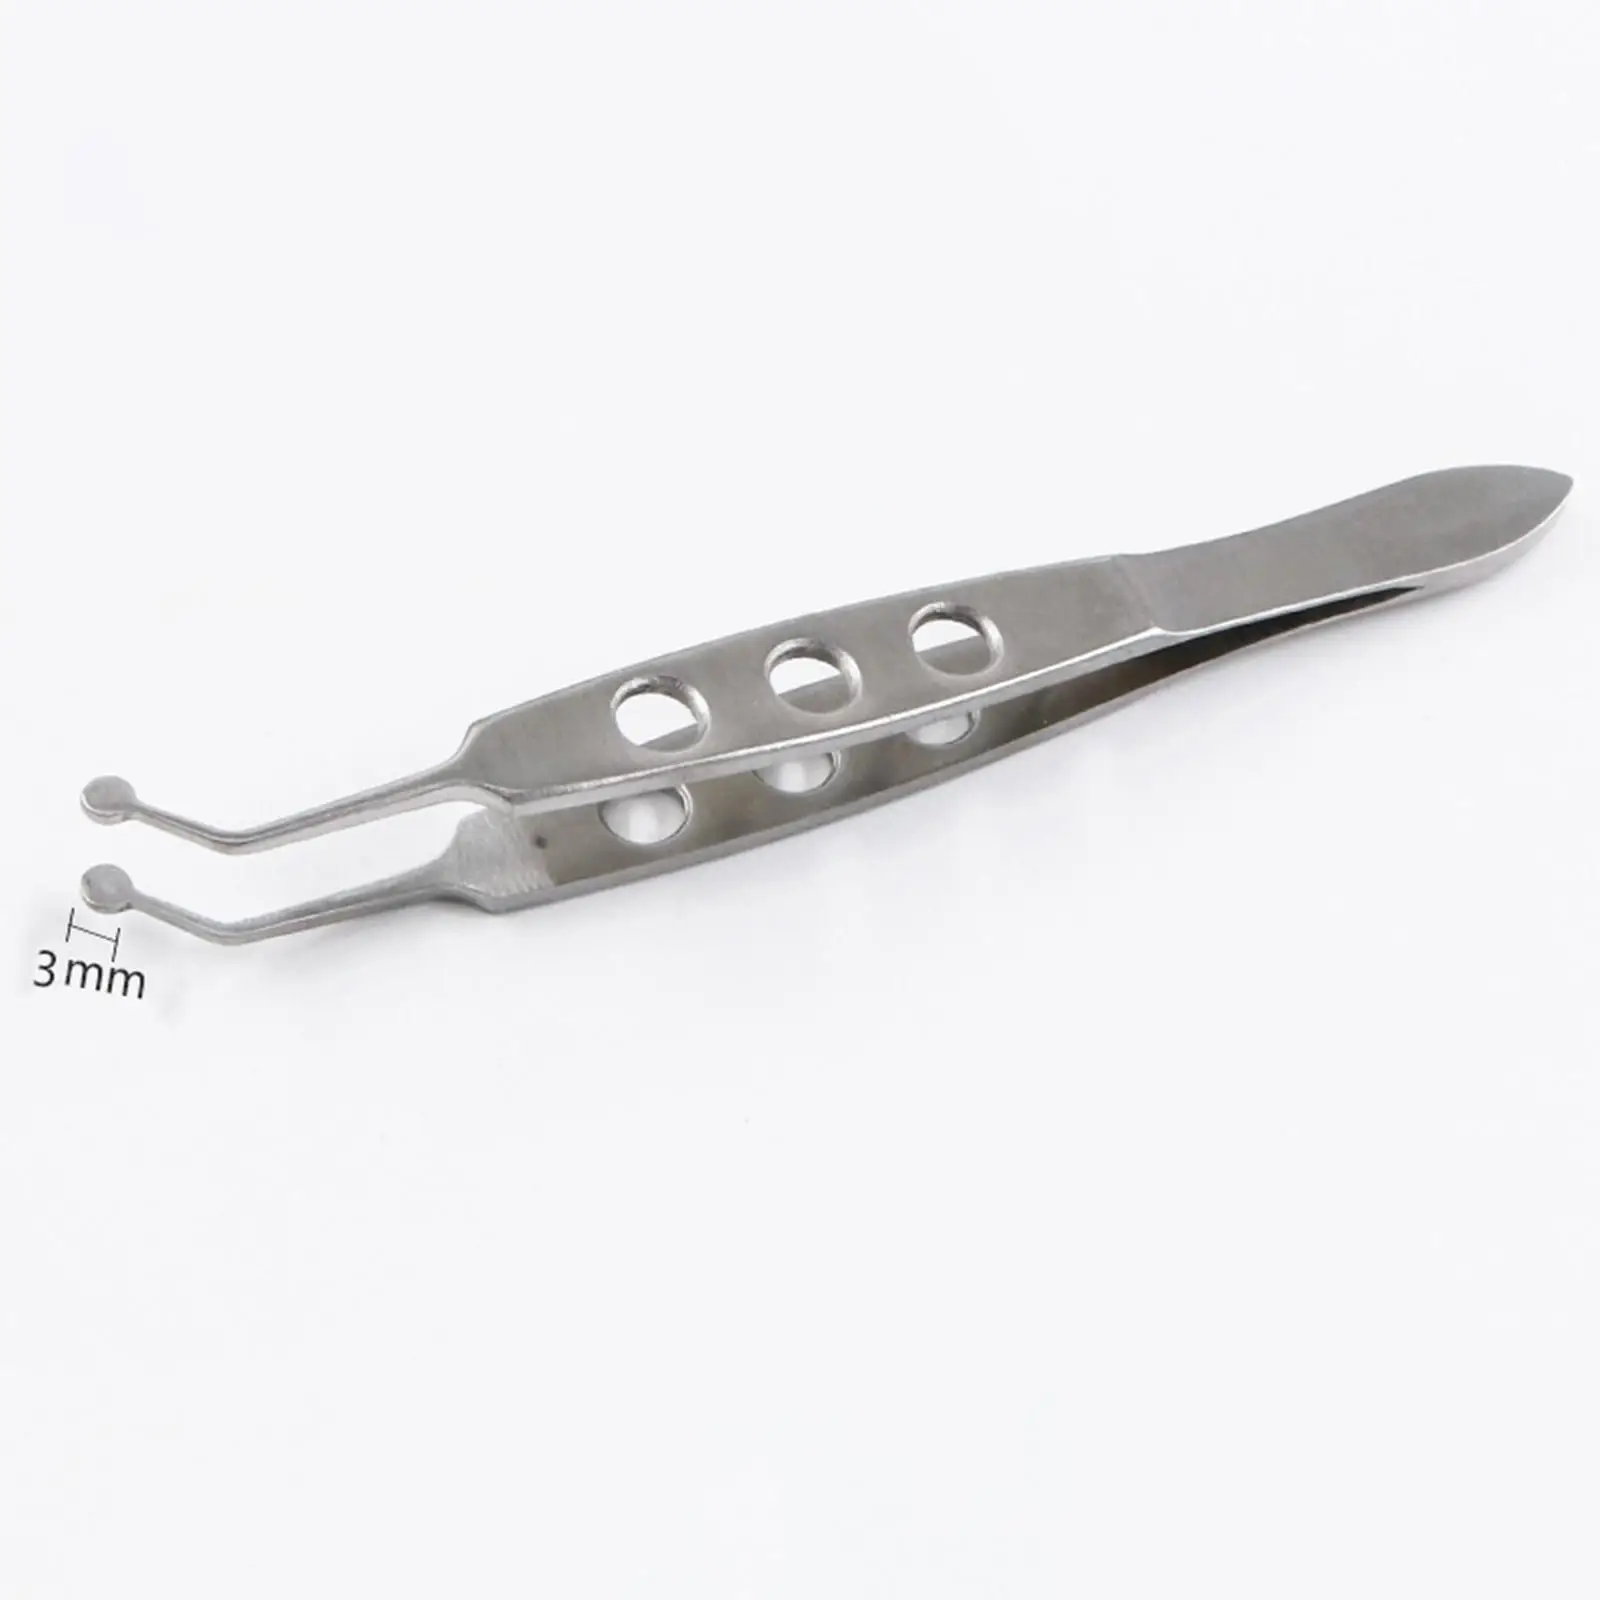 Meibomian Gland Expressor Forceps Ophthalmic Eye Tool High Precision Tweezer Clip Tools for Eyelid Meibomian Flap